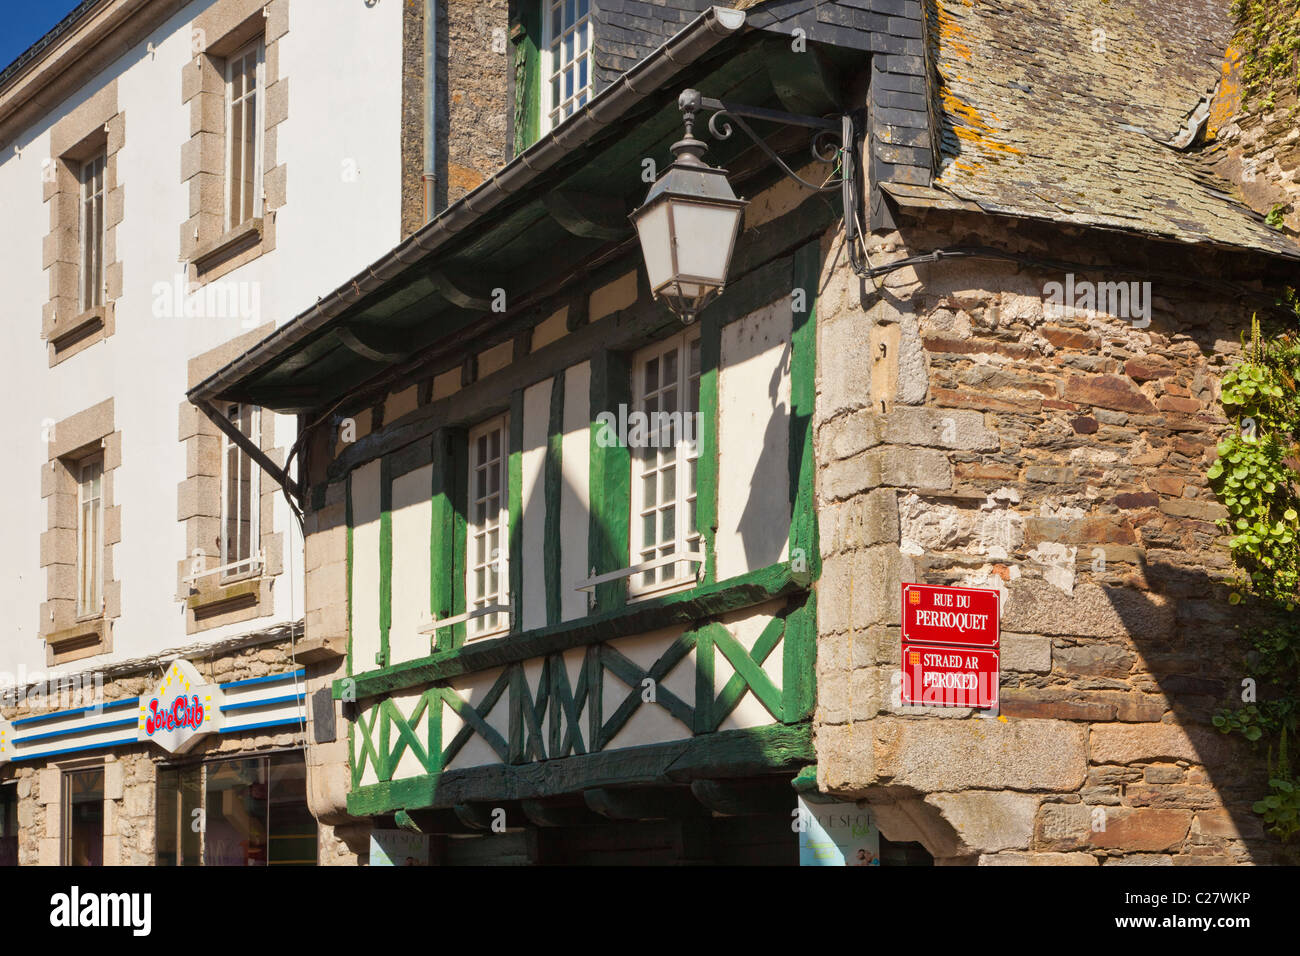 Old medieval house with street signs Pontivy, Morbihan, Brittany, France, Europe Stock Photo